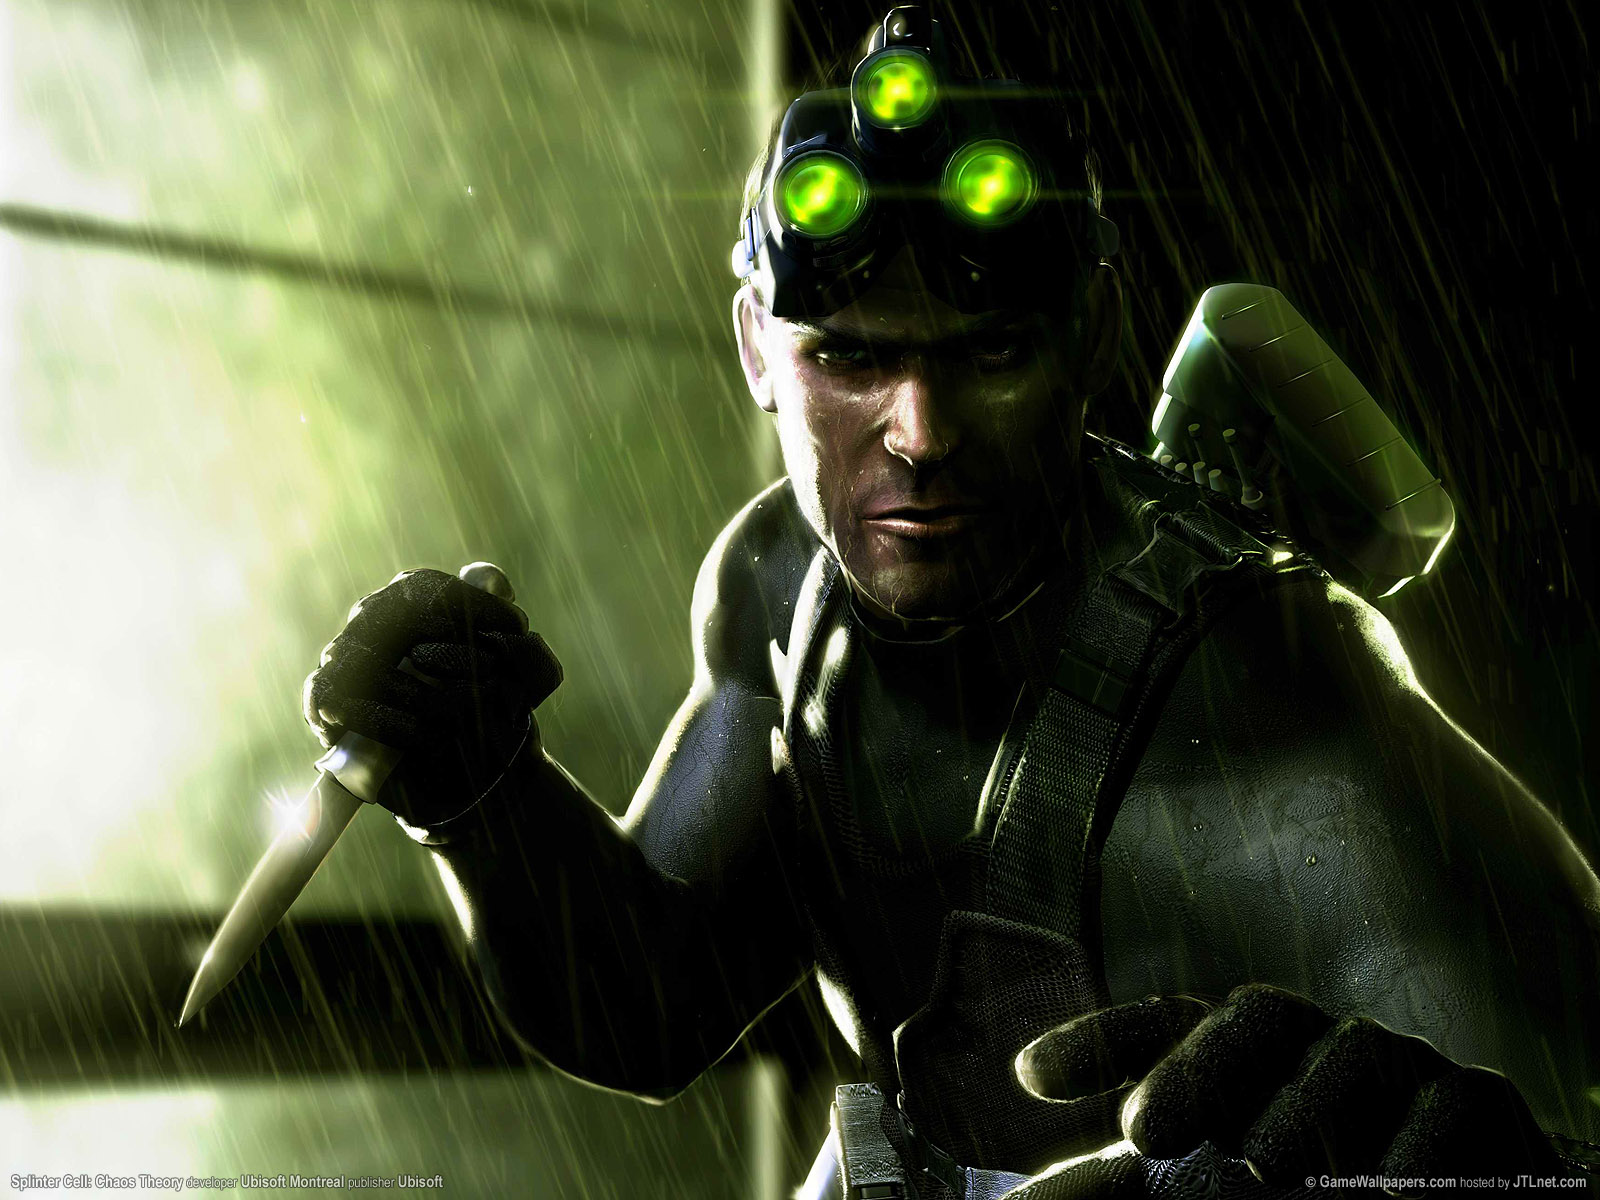 Splinter Cell Blacklist is a poor representative of the Splinter Cell franchise. The campaign is linear and frustrating rather than the fun, stealthy romp ...